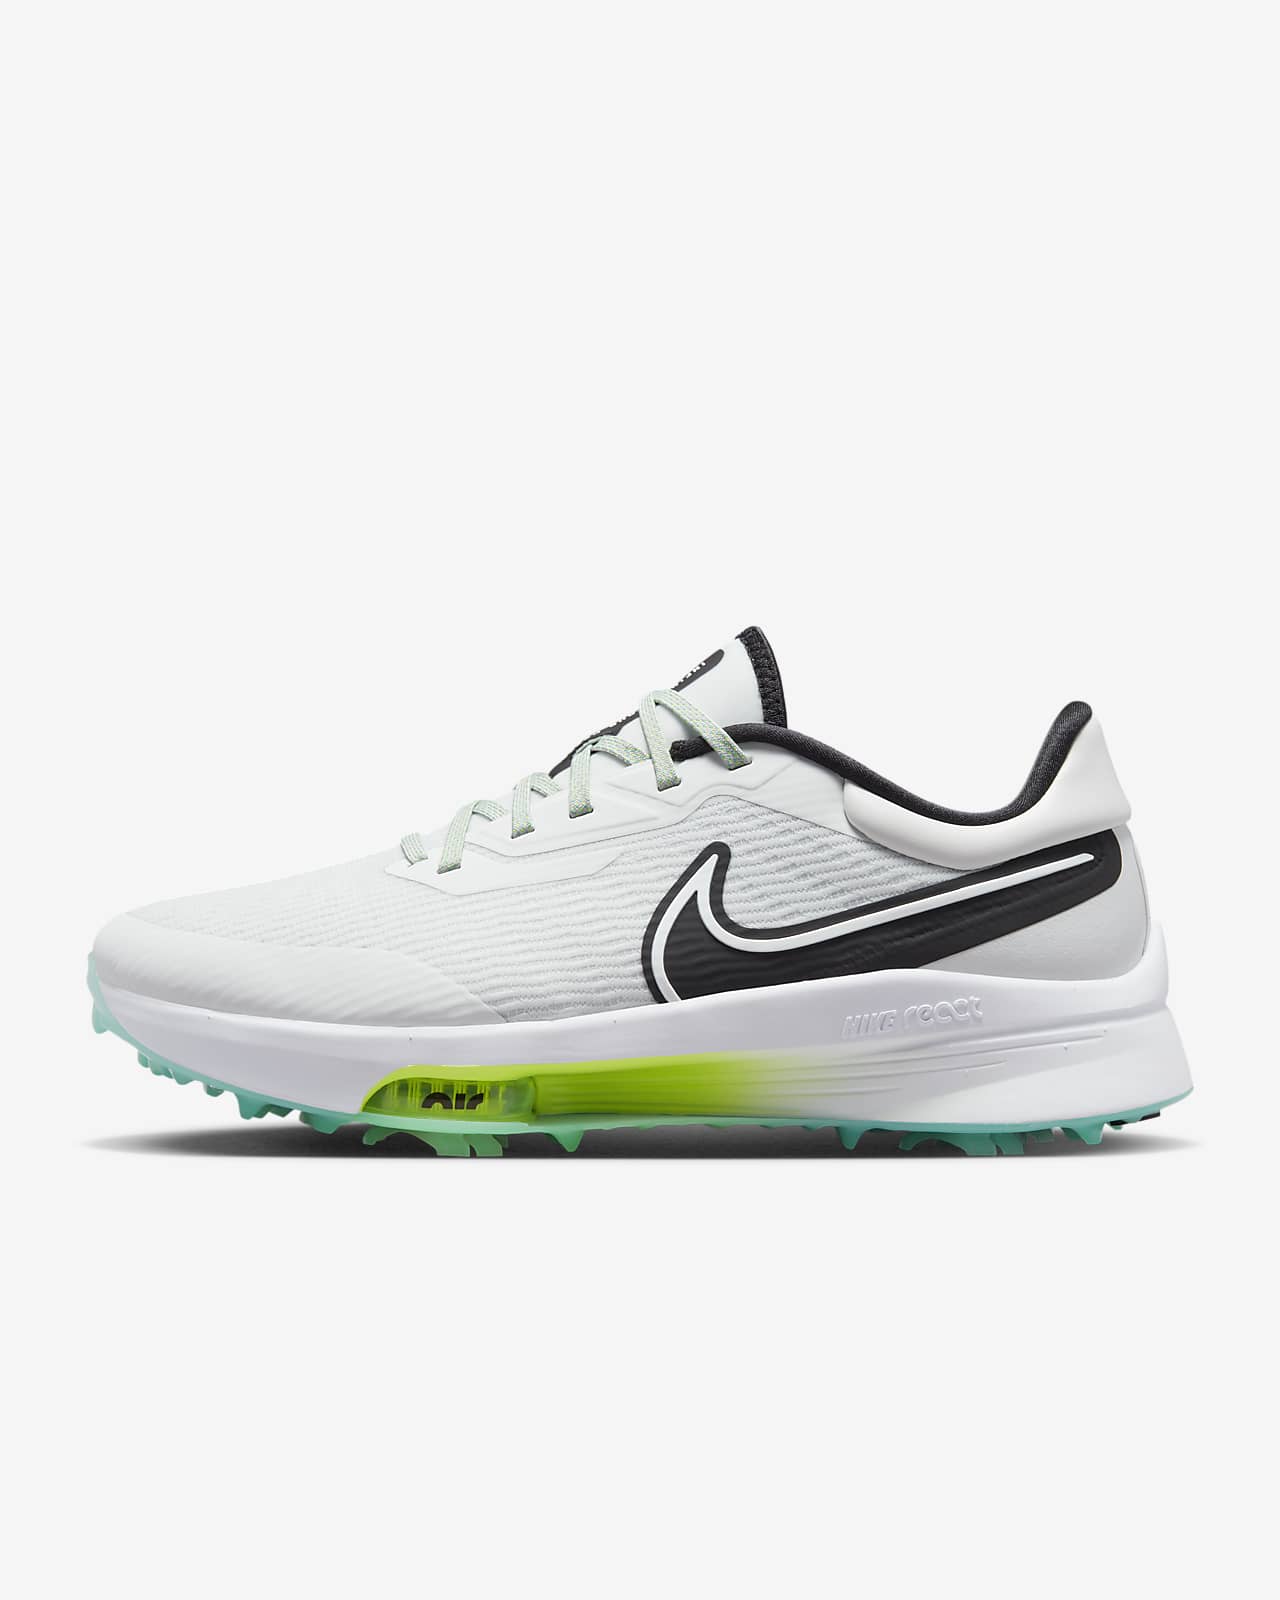 Nike Air Zoom Infinity Tour Next Review: The Golf Shoe Revolution You WONT Believe!